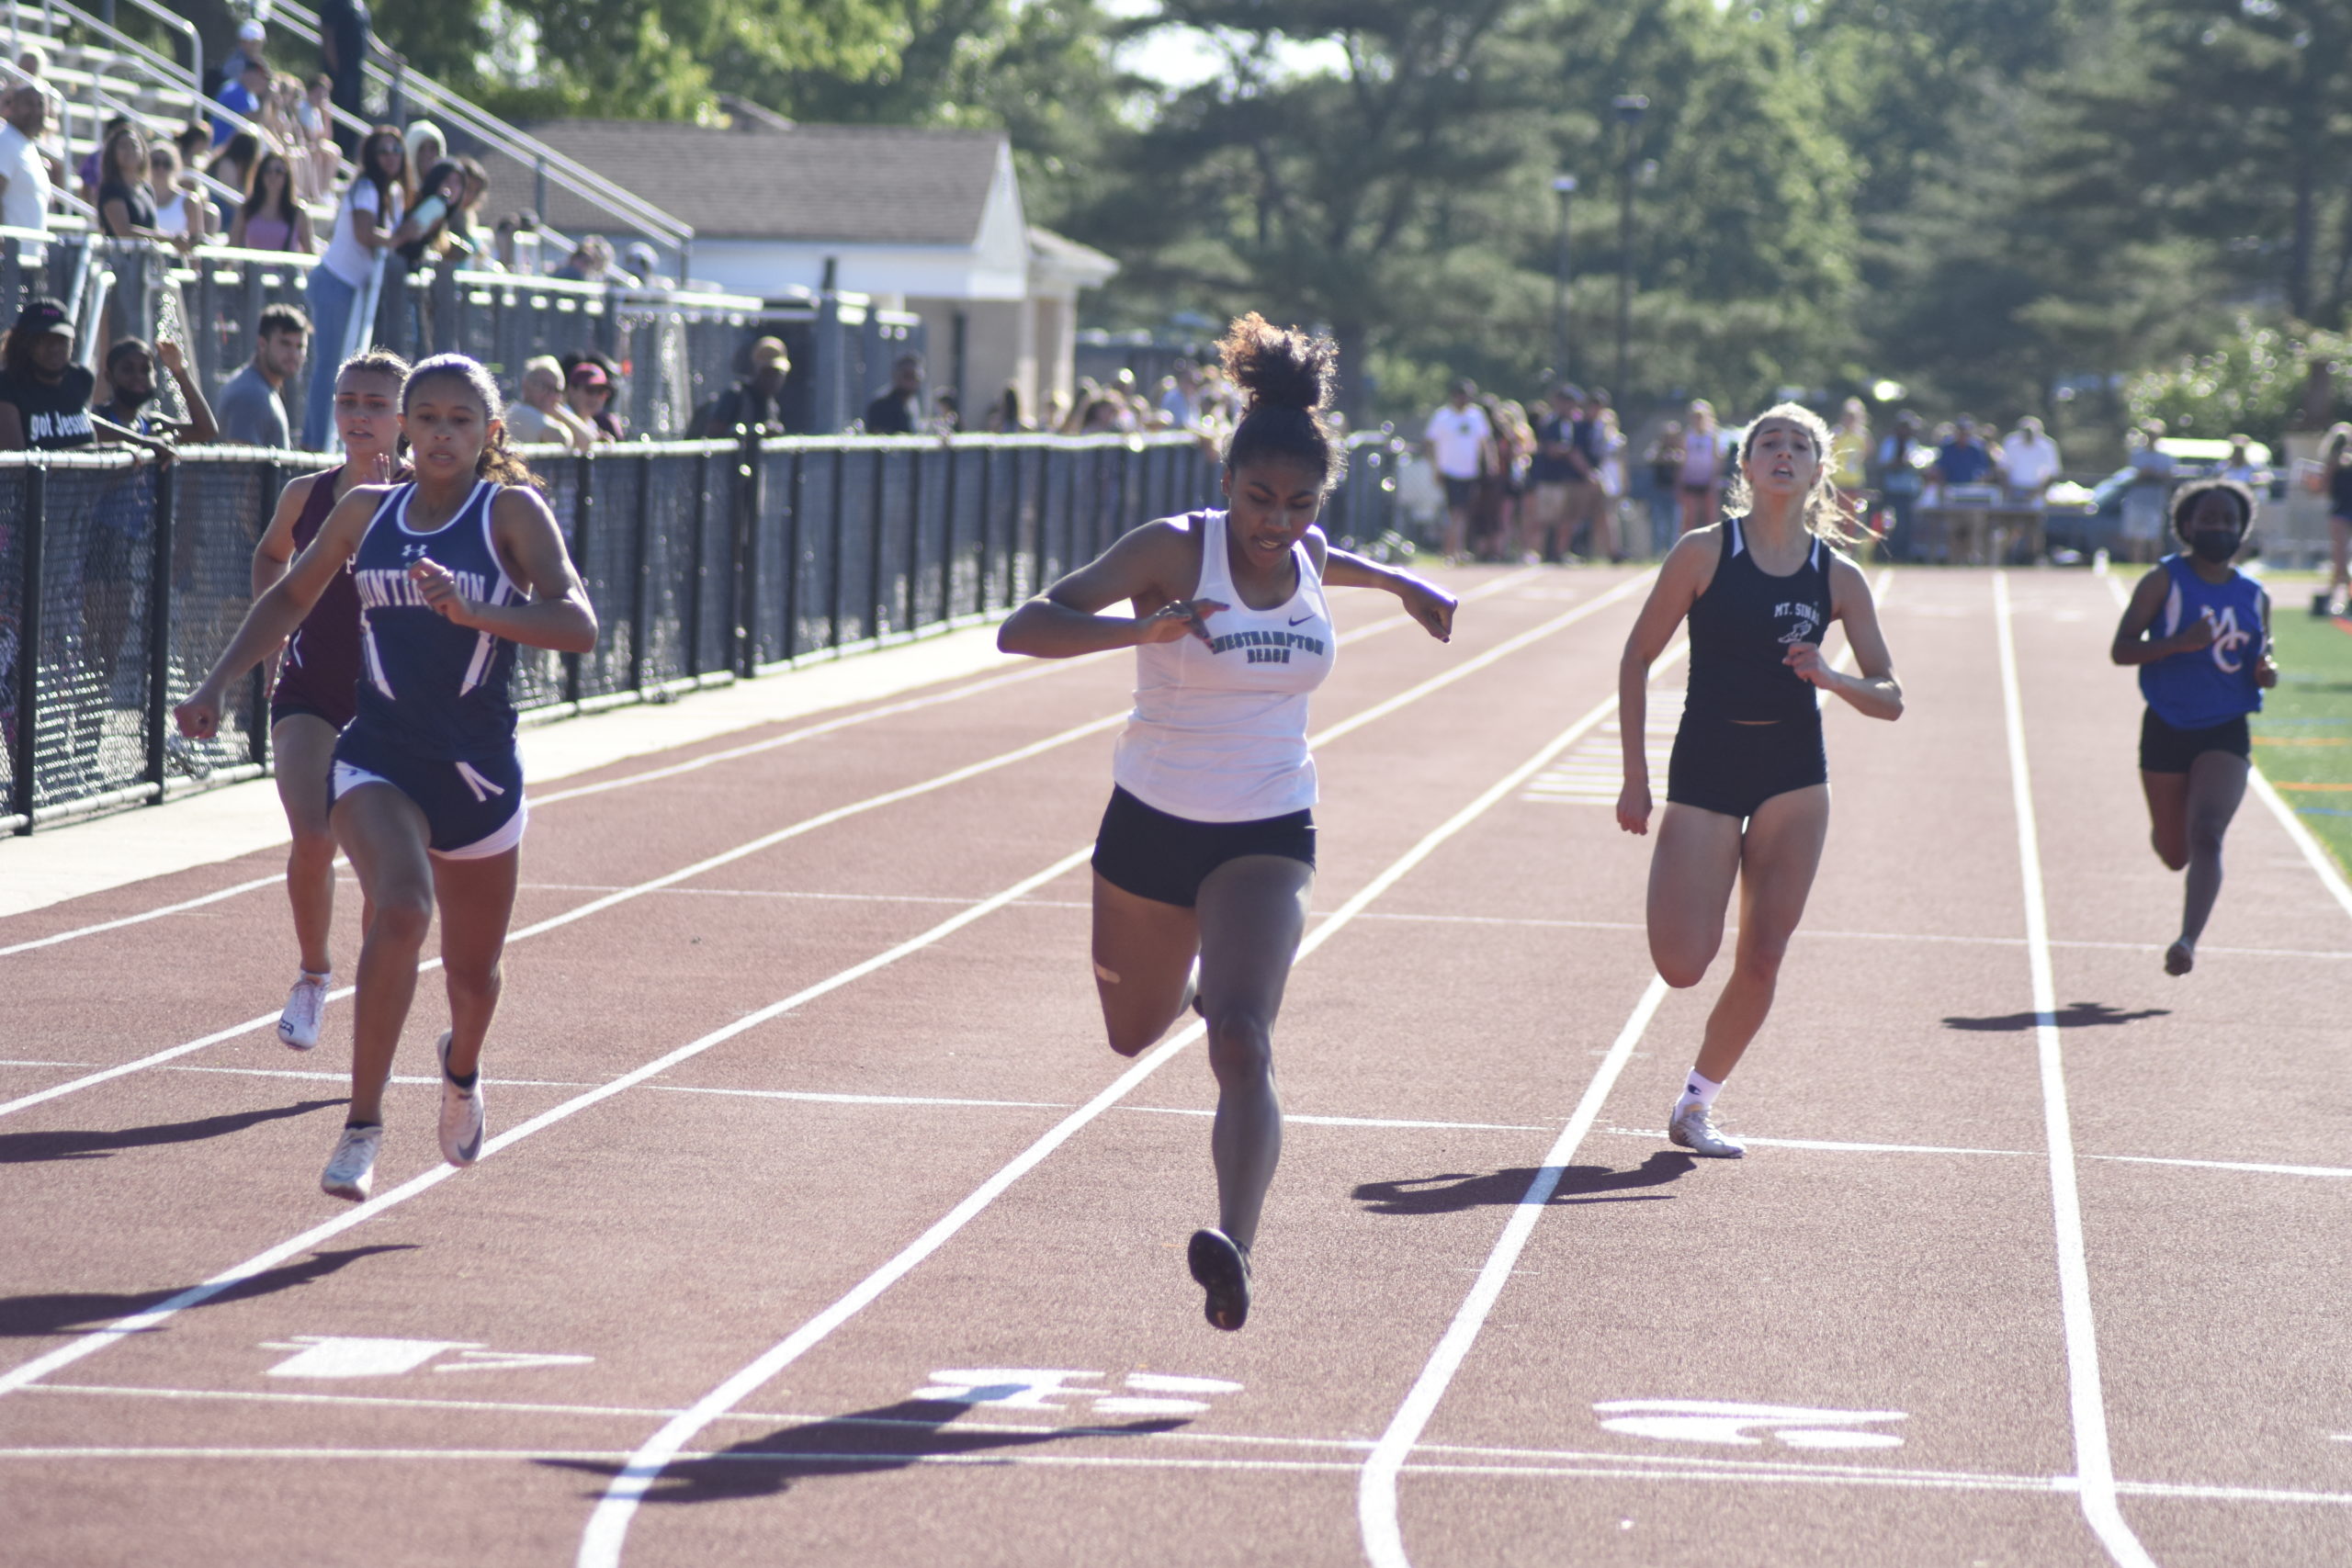 Westhampton Beach senior Oceane Ode crosses the finish line first in the 200-meter dash. She also won the 100-meter dash and was named Sprinter of the Year.